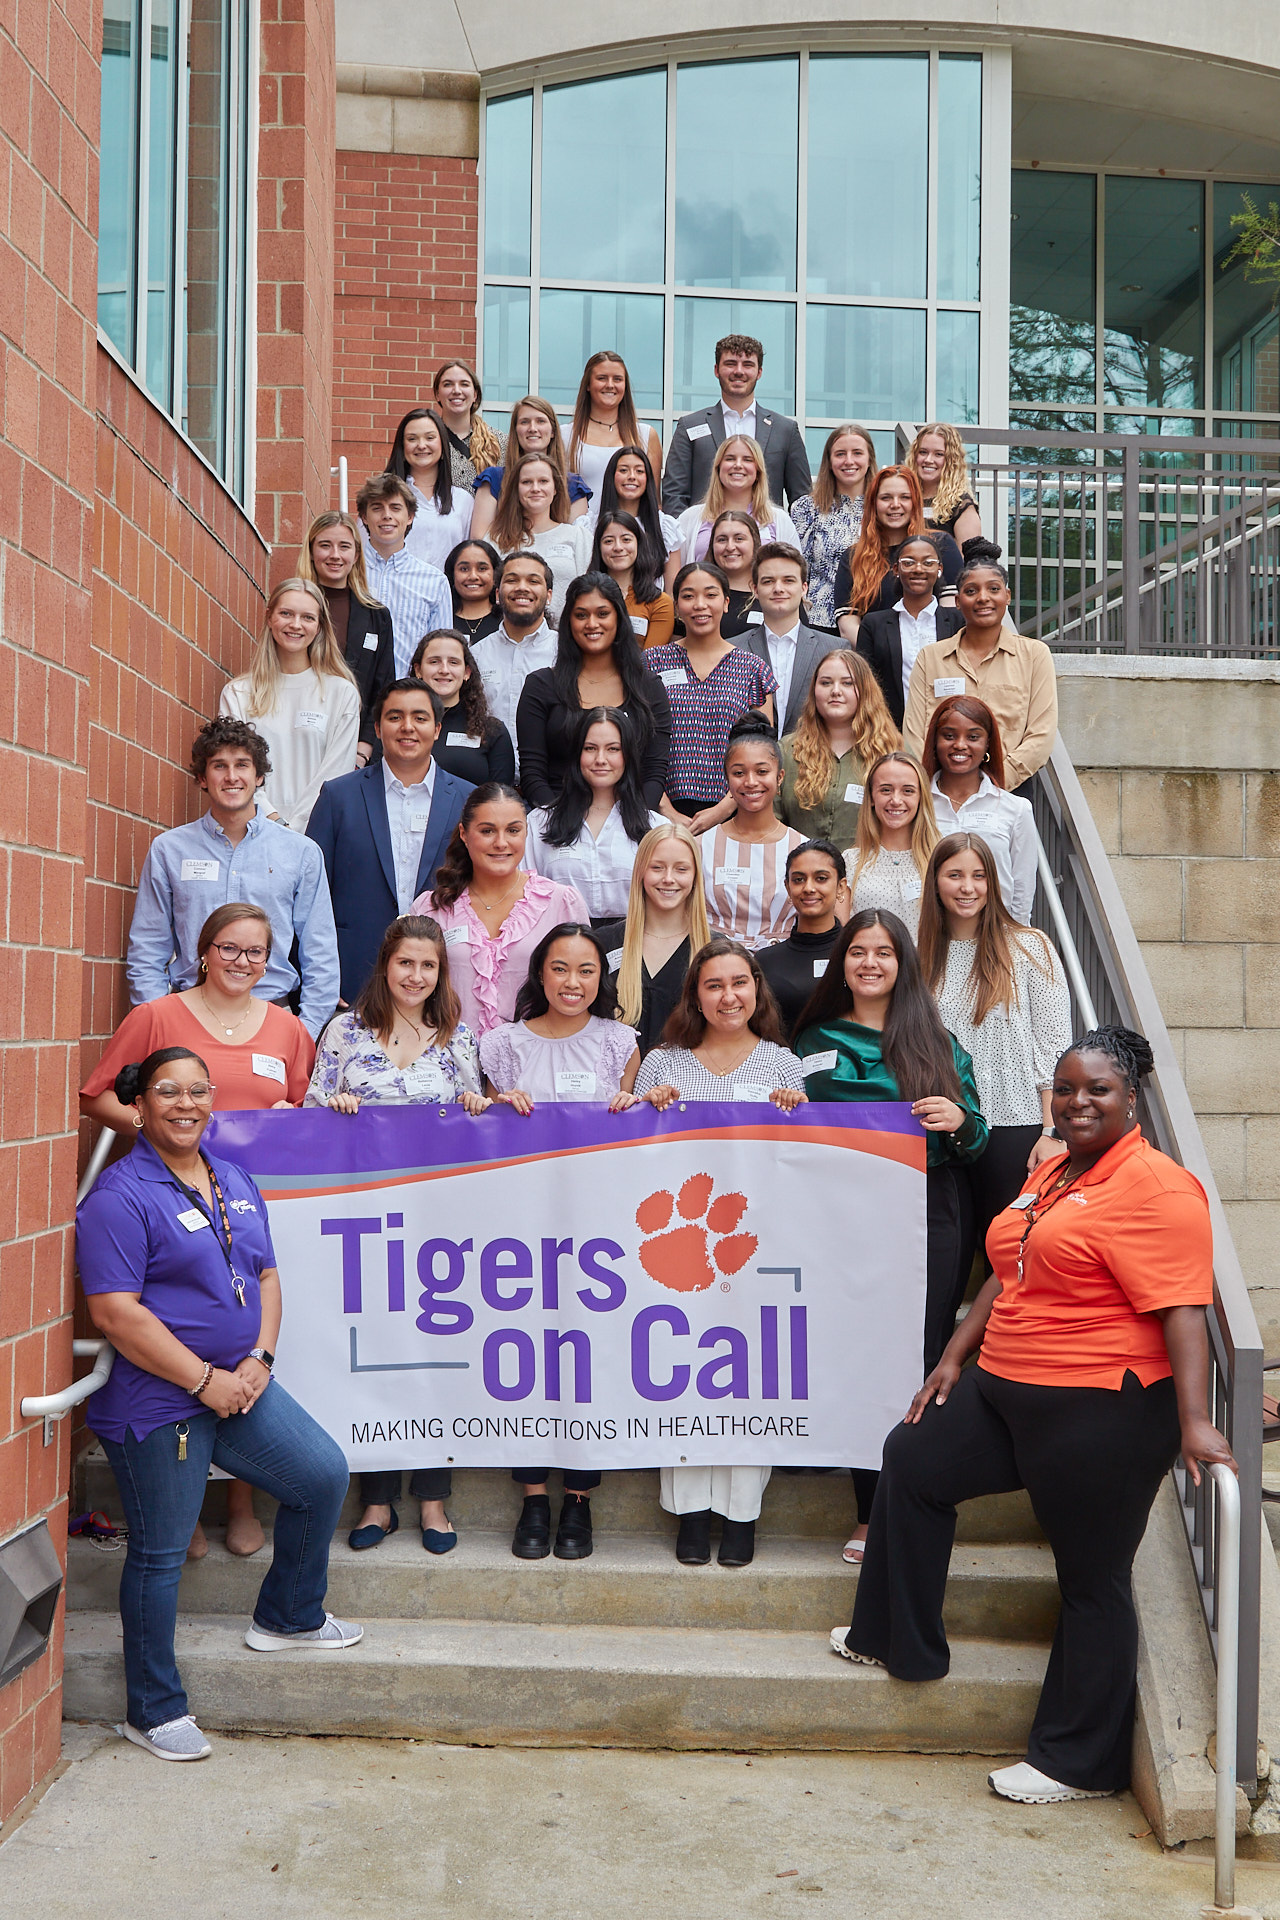 Tigers on Call/HPA students and ambassadors on steps holding a Tigers on Call banner outside Hendrix Student Center.